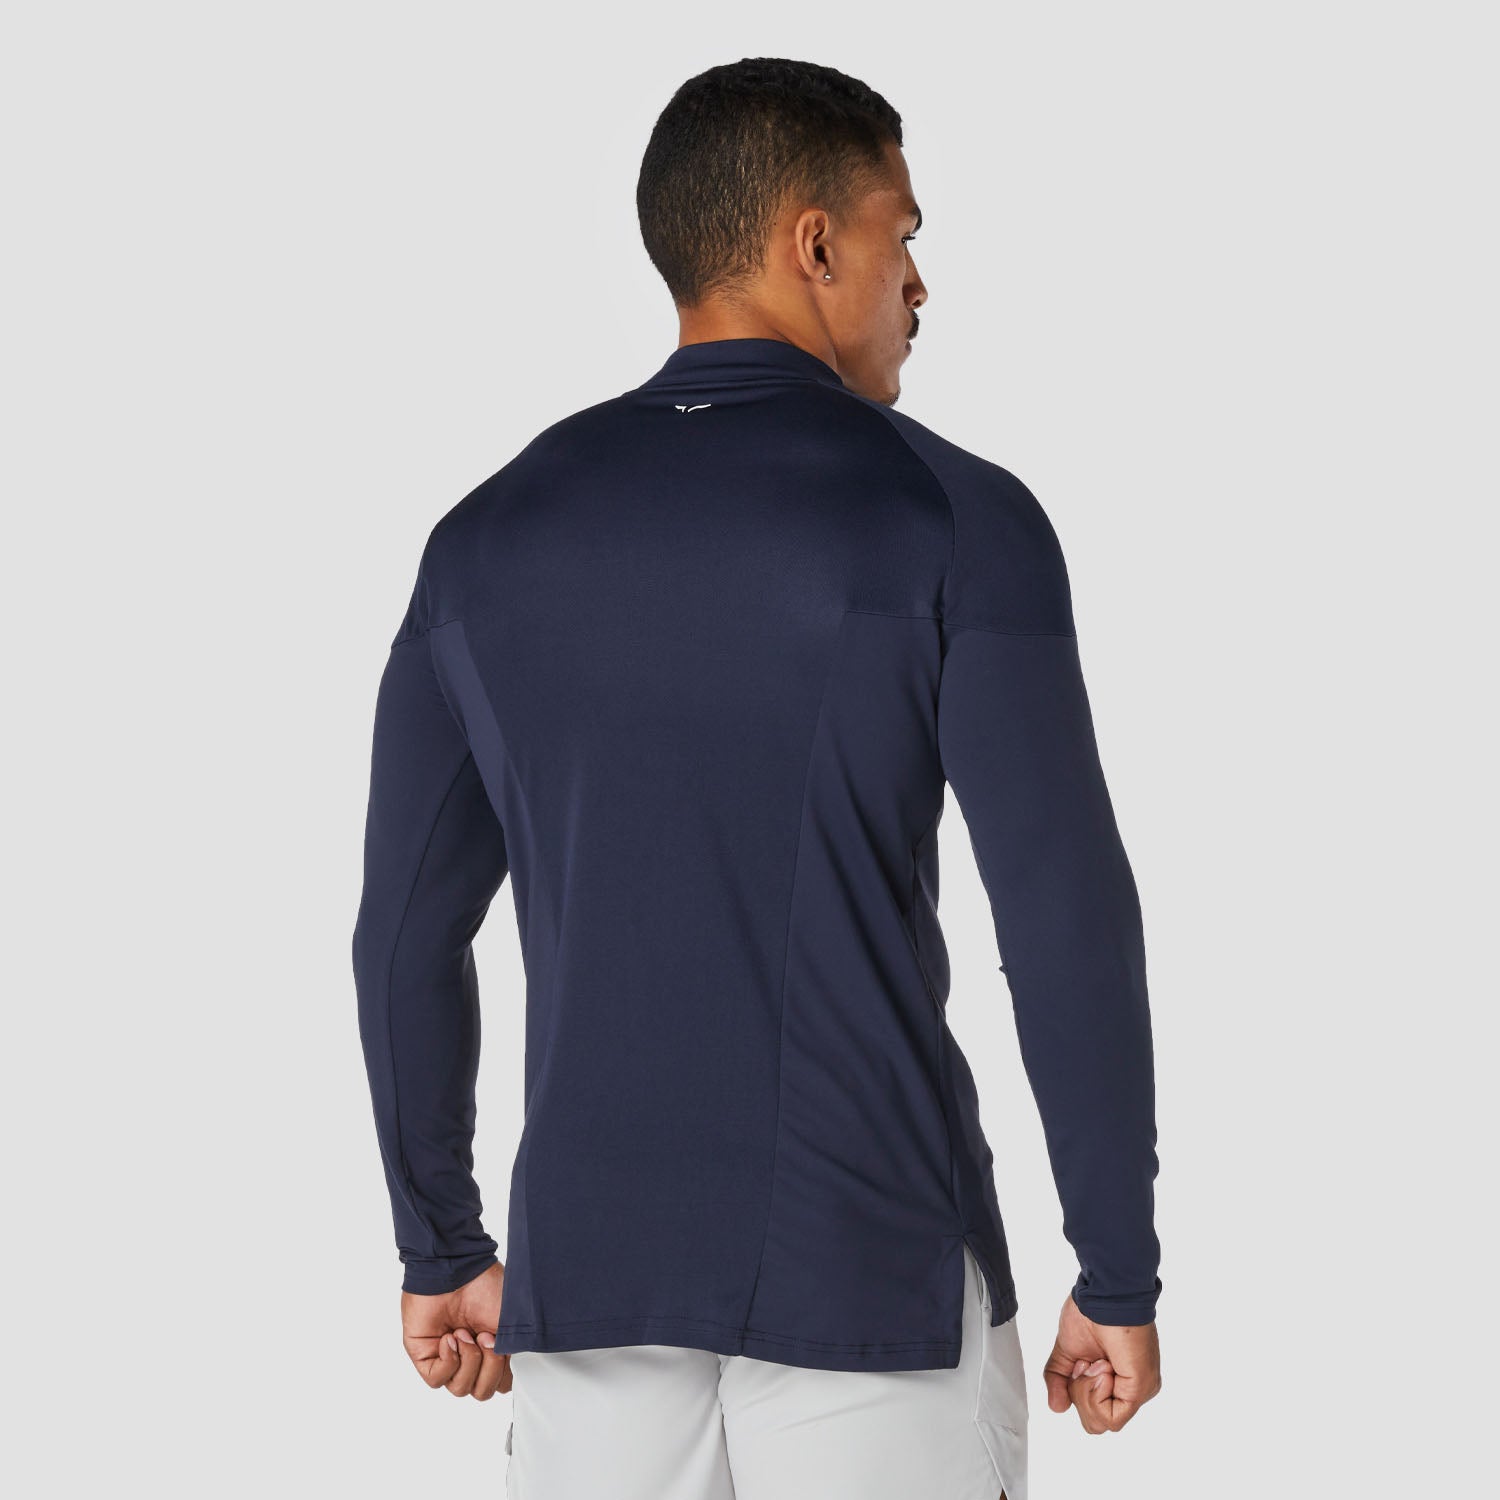 squatwolf-running-tops-for-men-core-running-top-navy-long-sleeves-gym-wear